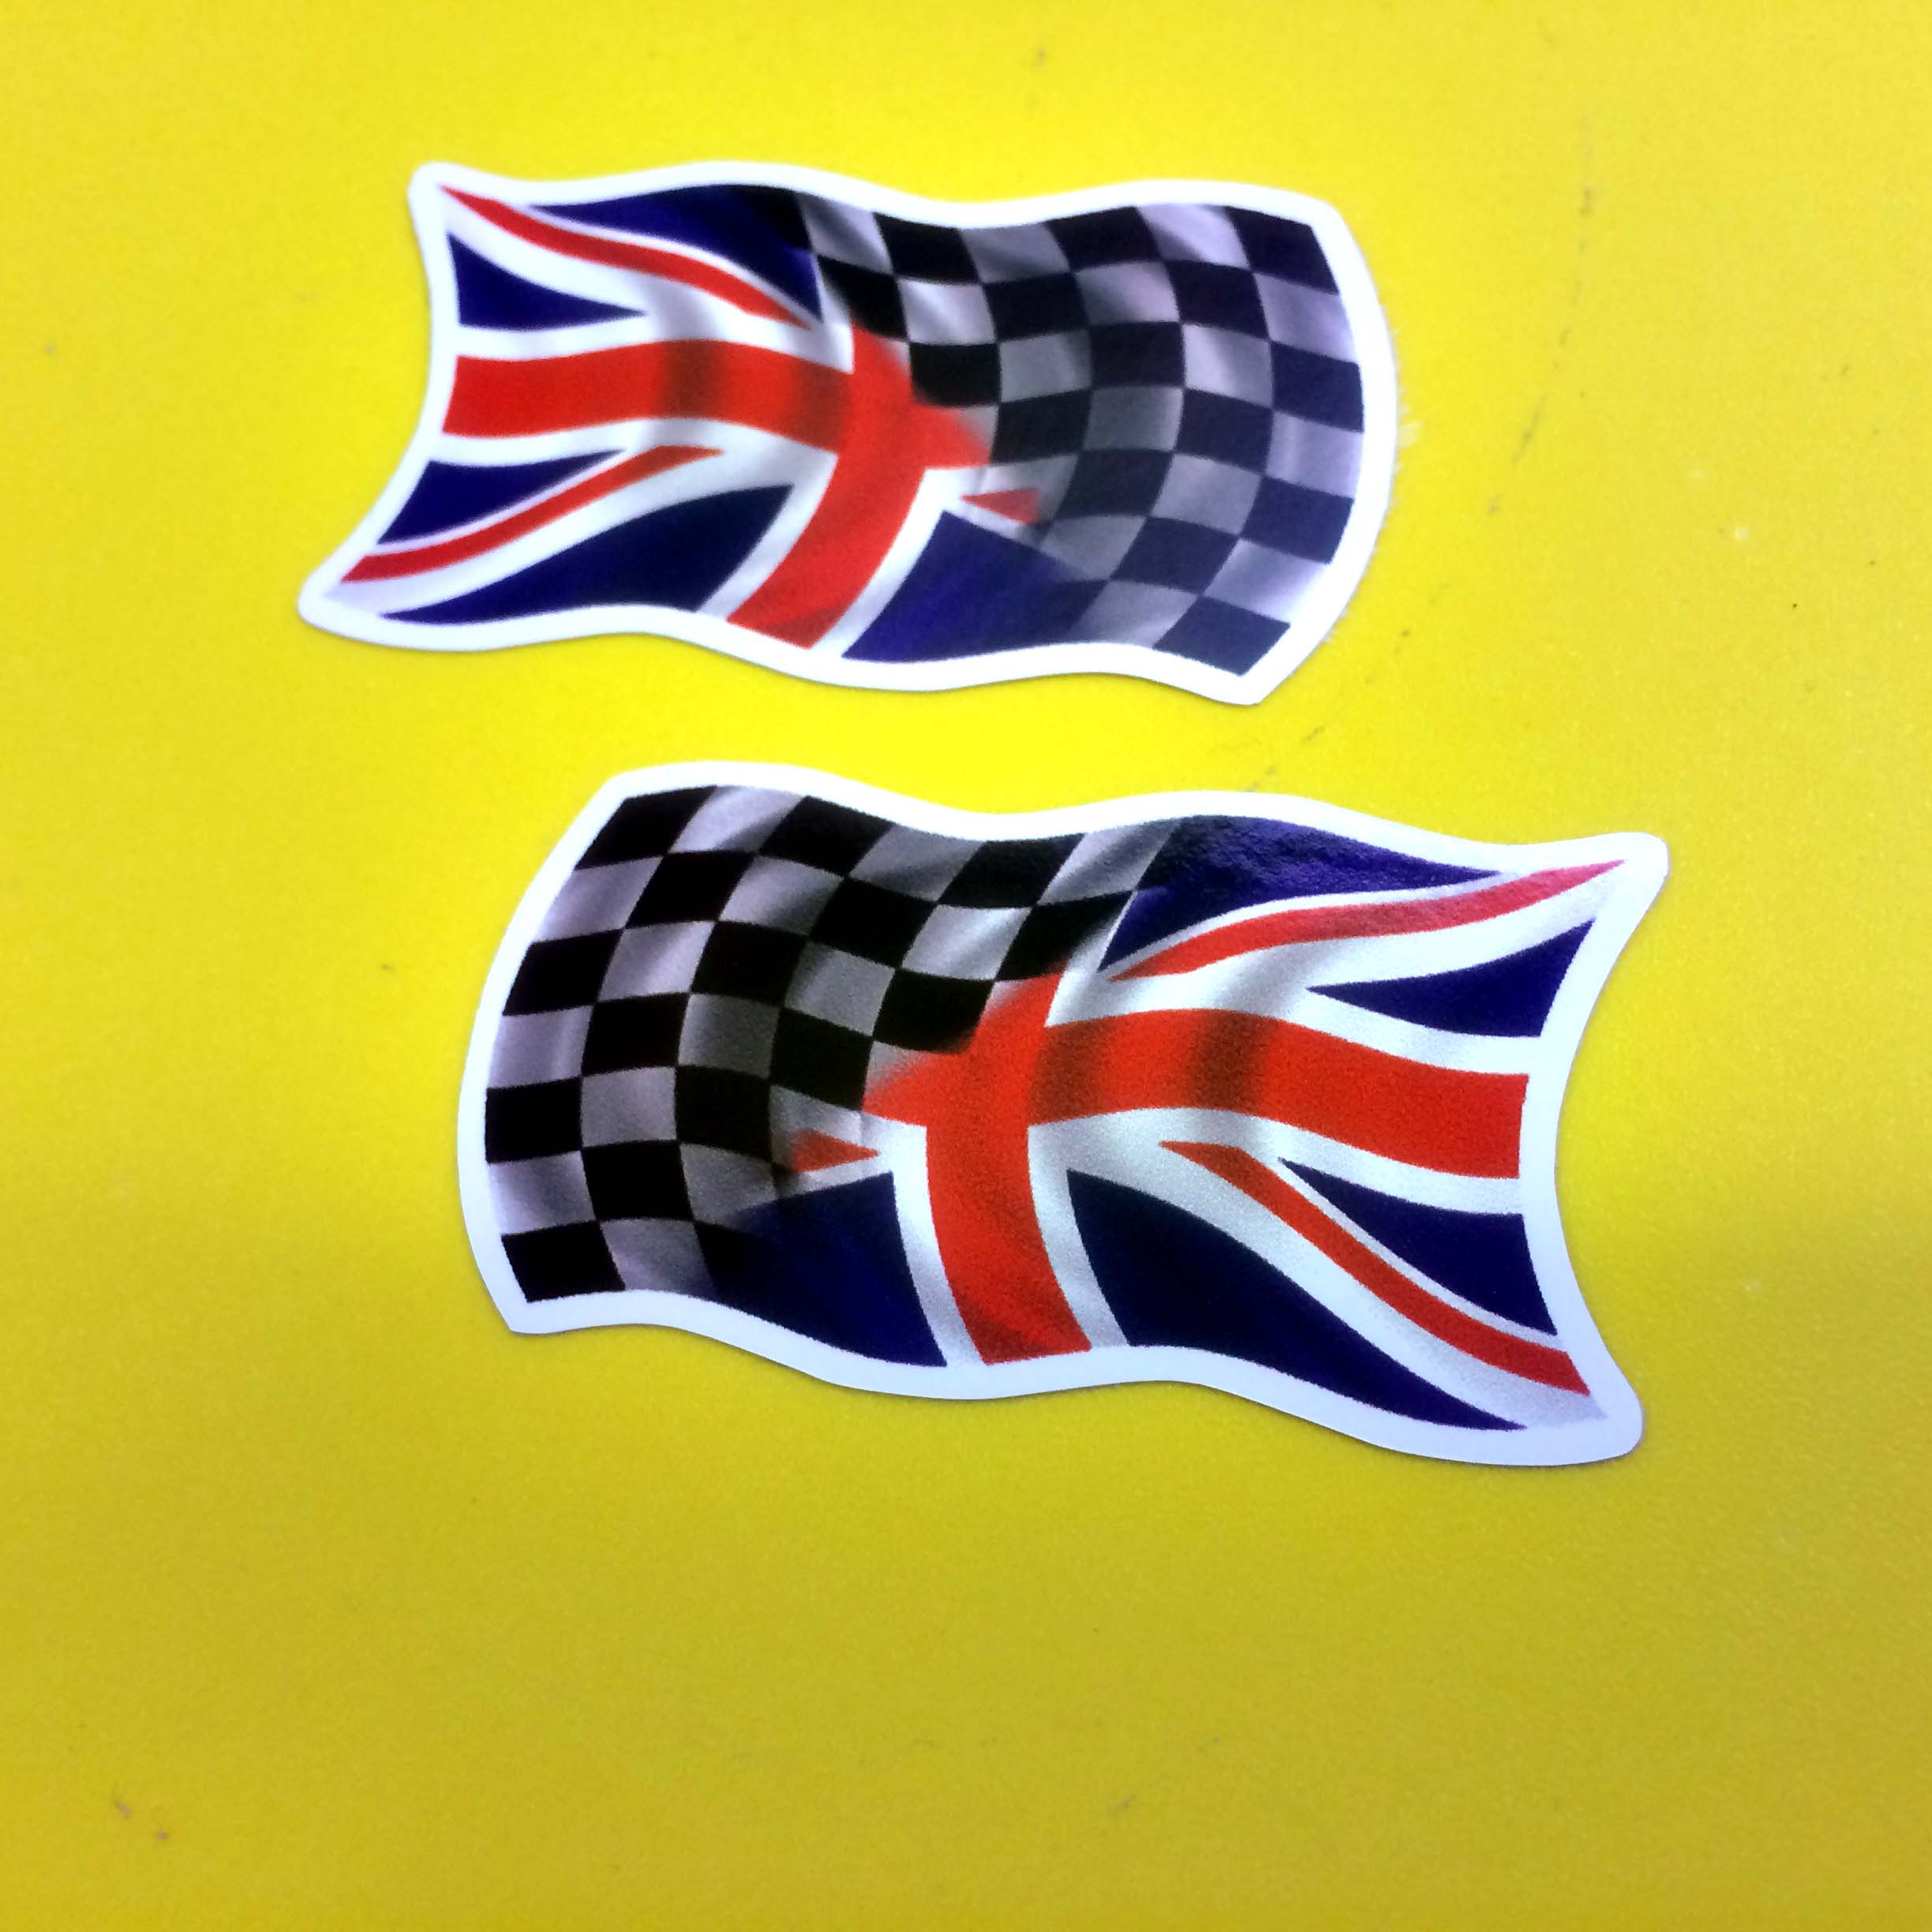 CHEQUERED UNION JACK GB UK STICKERS. A wavy flag. One half is black and white chequer, the other half is the red, white and blue Union Jack.